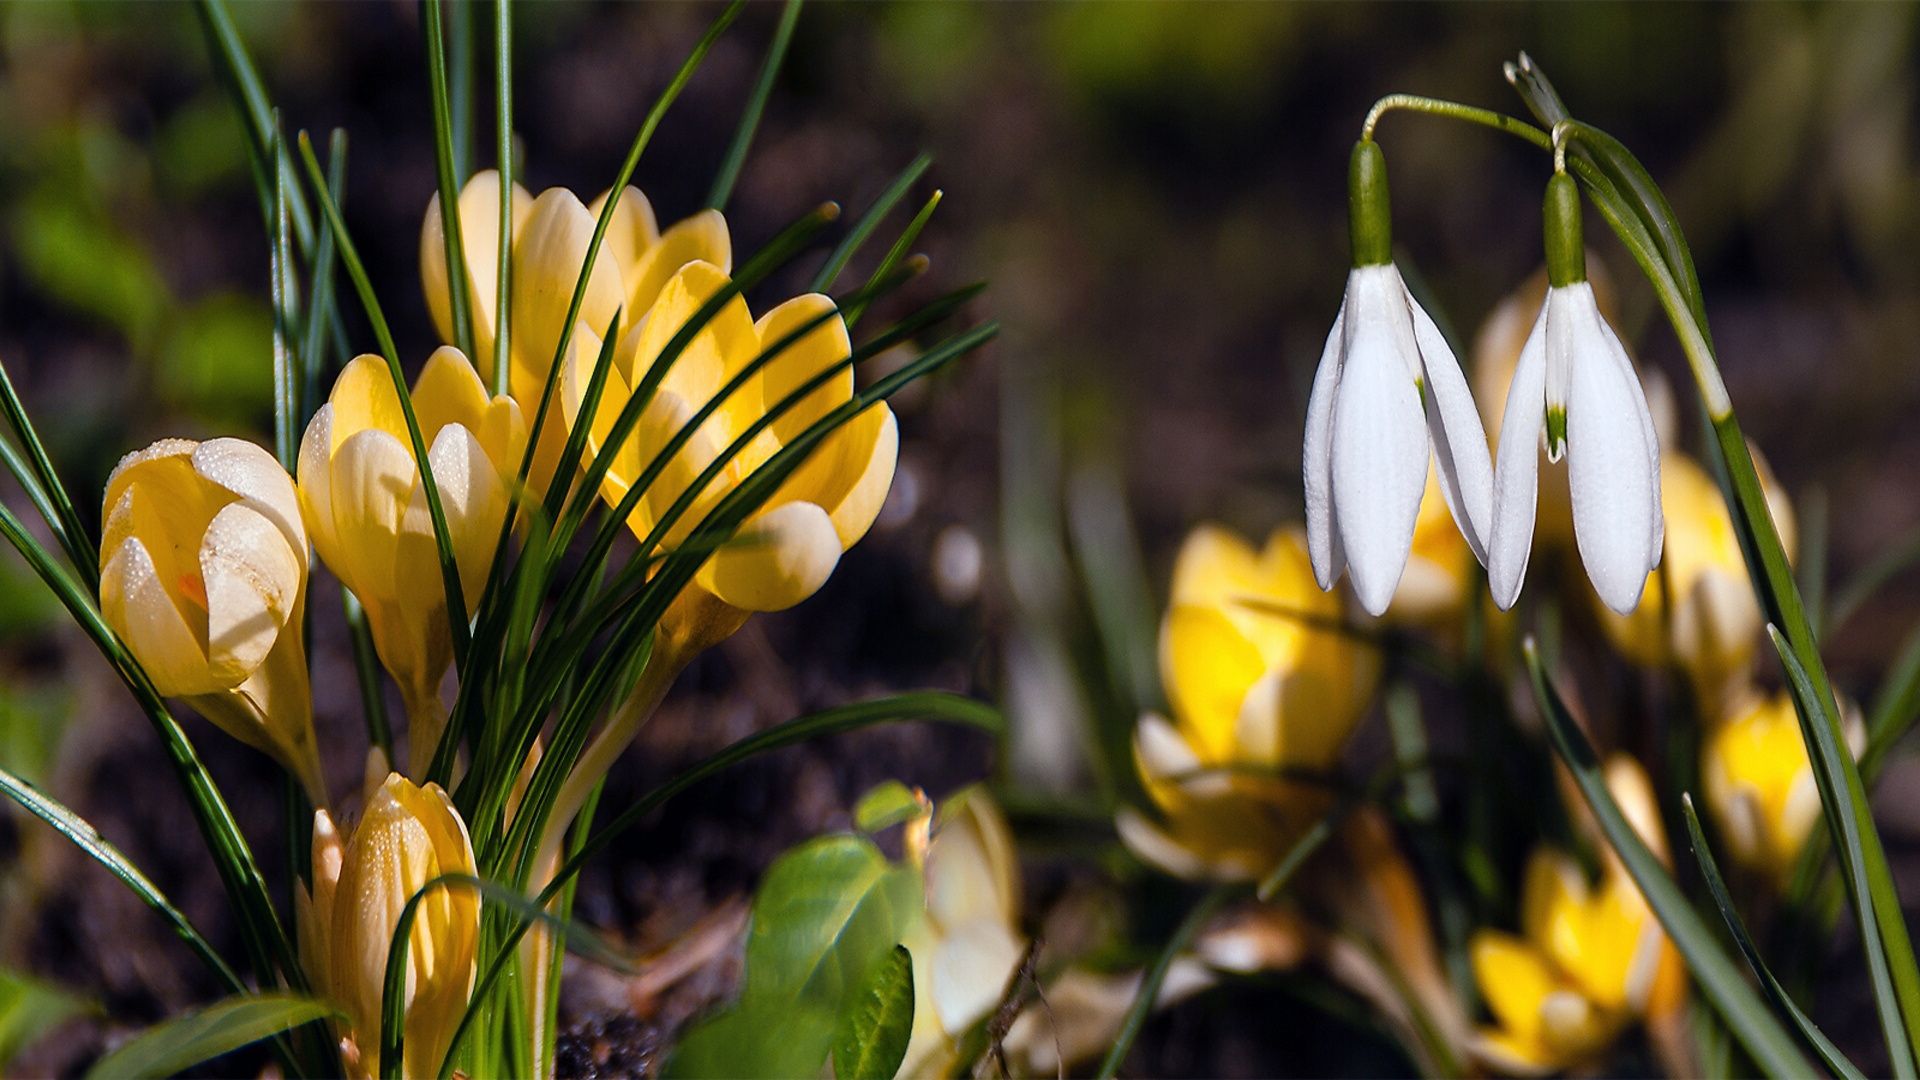 Wallpaper. Spring. photo. picture. spring, crocuses, snowdrops